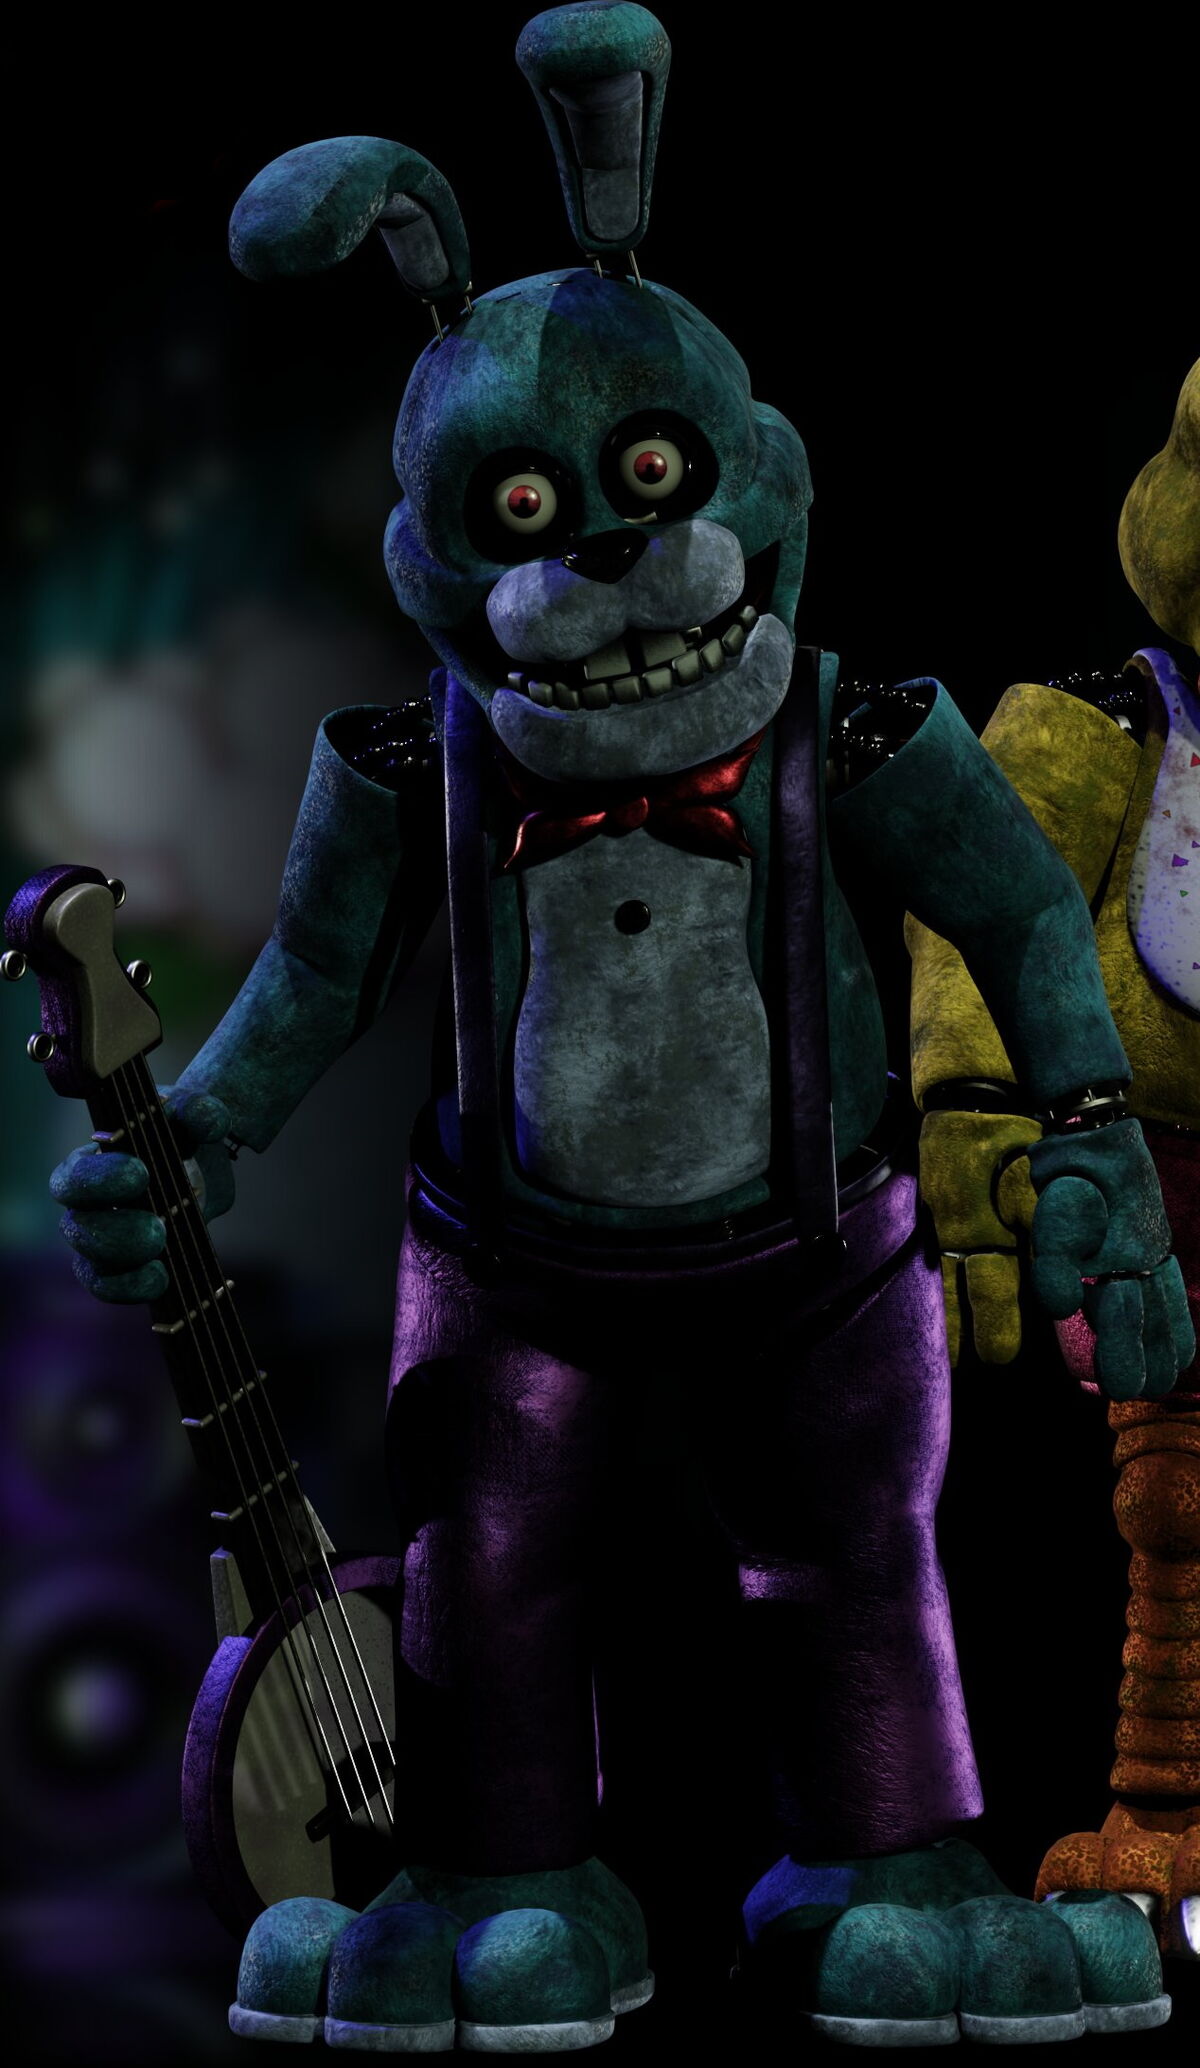 Don't yall think the FNAF Plus animatronics look too overtly scary to be  used in an actual restaurant? Bonnie's eyes would scare all the kids away.  They're missing the inviting/welcoming allure that